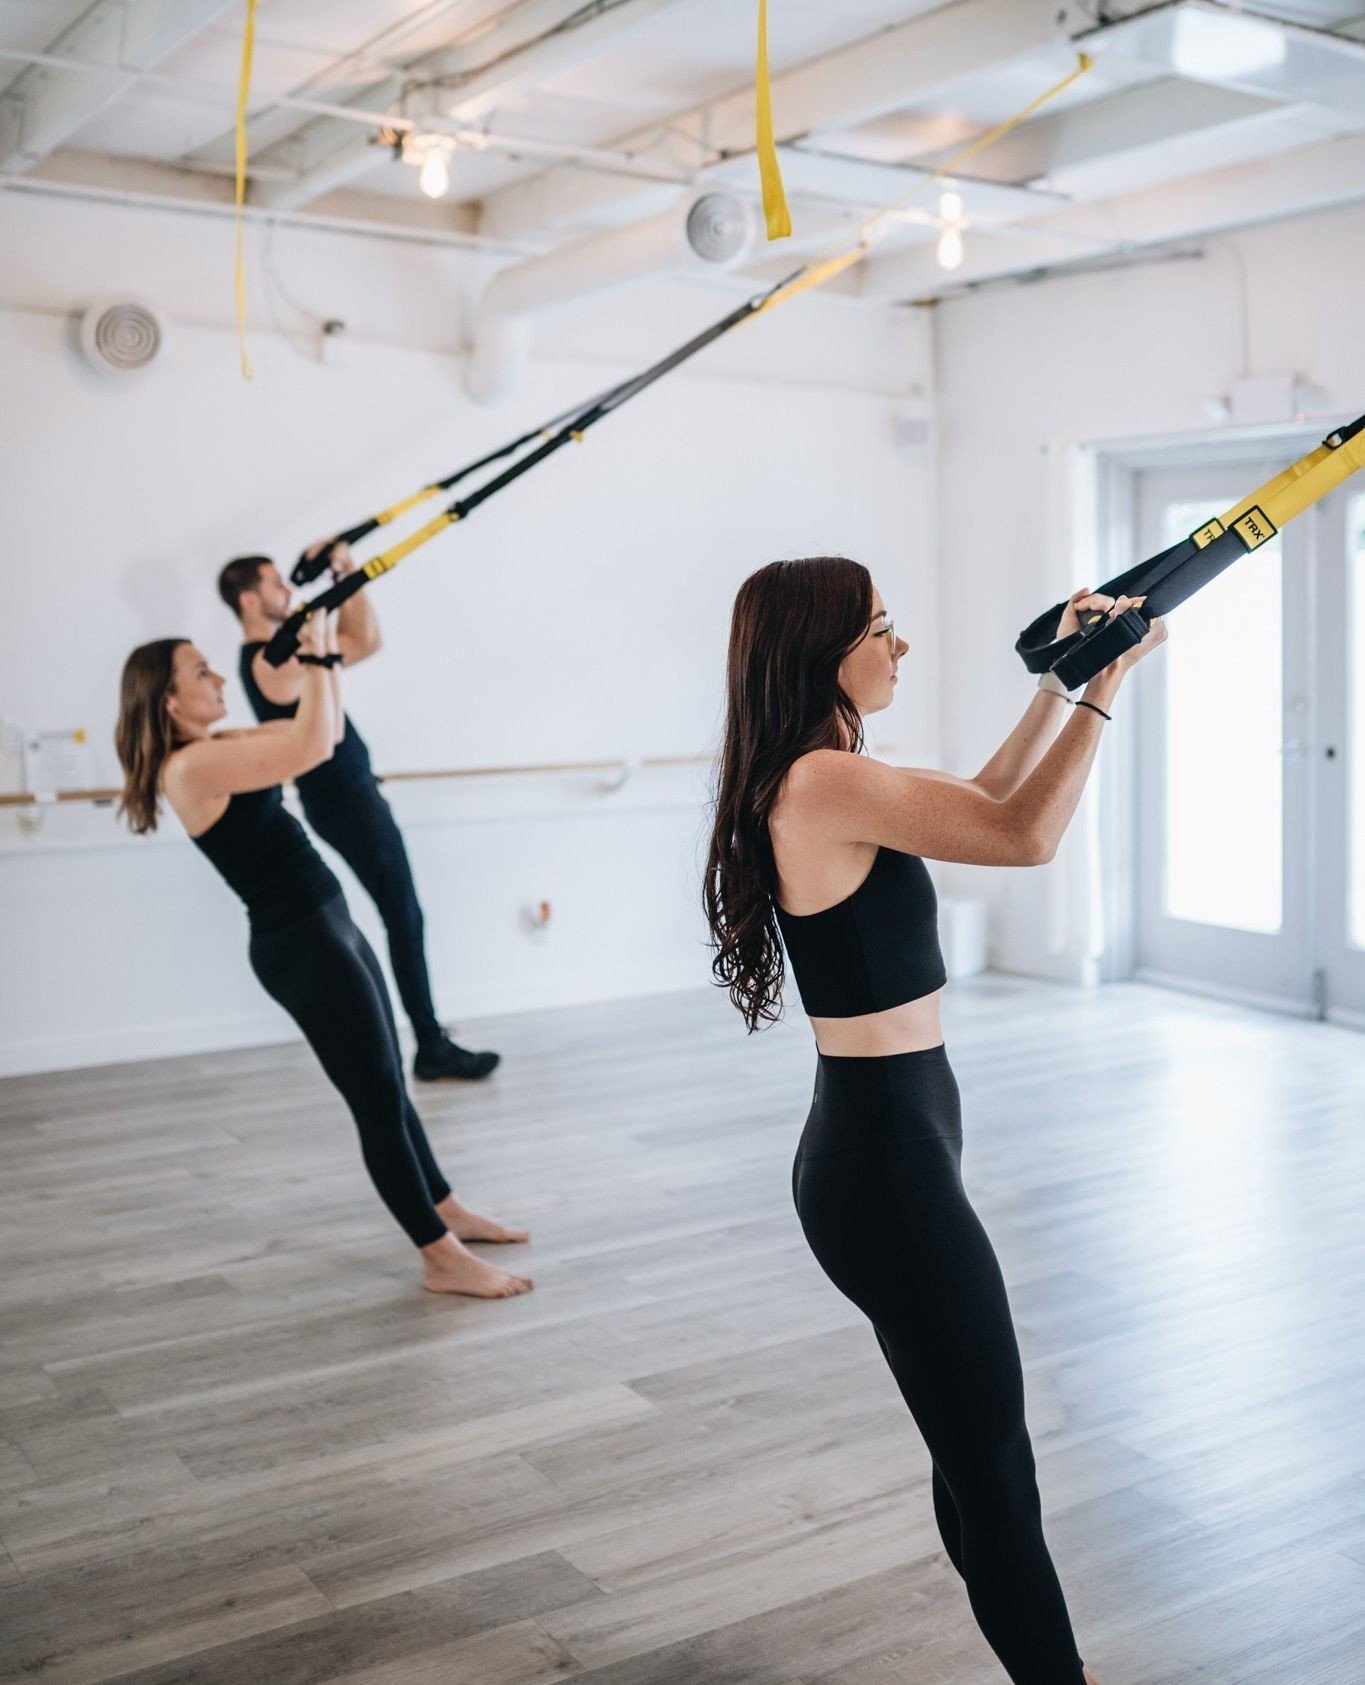 10 reasons we LOVE TRX workouts:⁠
⁠
💪 TRX is for everyone, no matter your fitness level.⁠
⁠
💪 Exercise never gets boring.⁠
⁠
💪 New twists on old exercises.⁠
⁠
💪 Burn more calories.⁠
⁠
💪 Get a stronger core.⁠
⁠
💪 Lower risk of injury compared wi